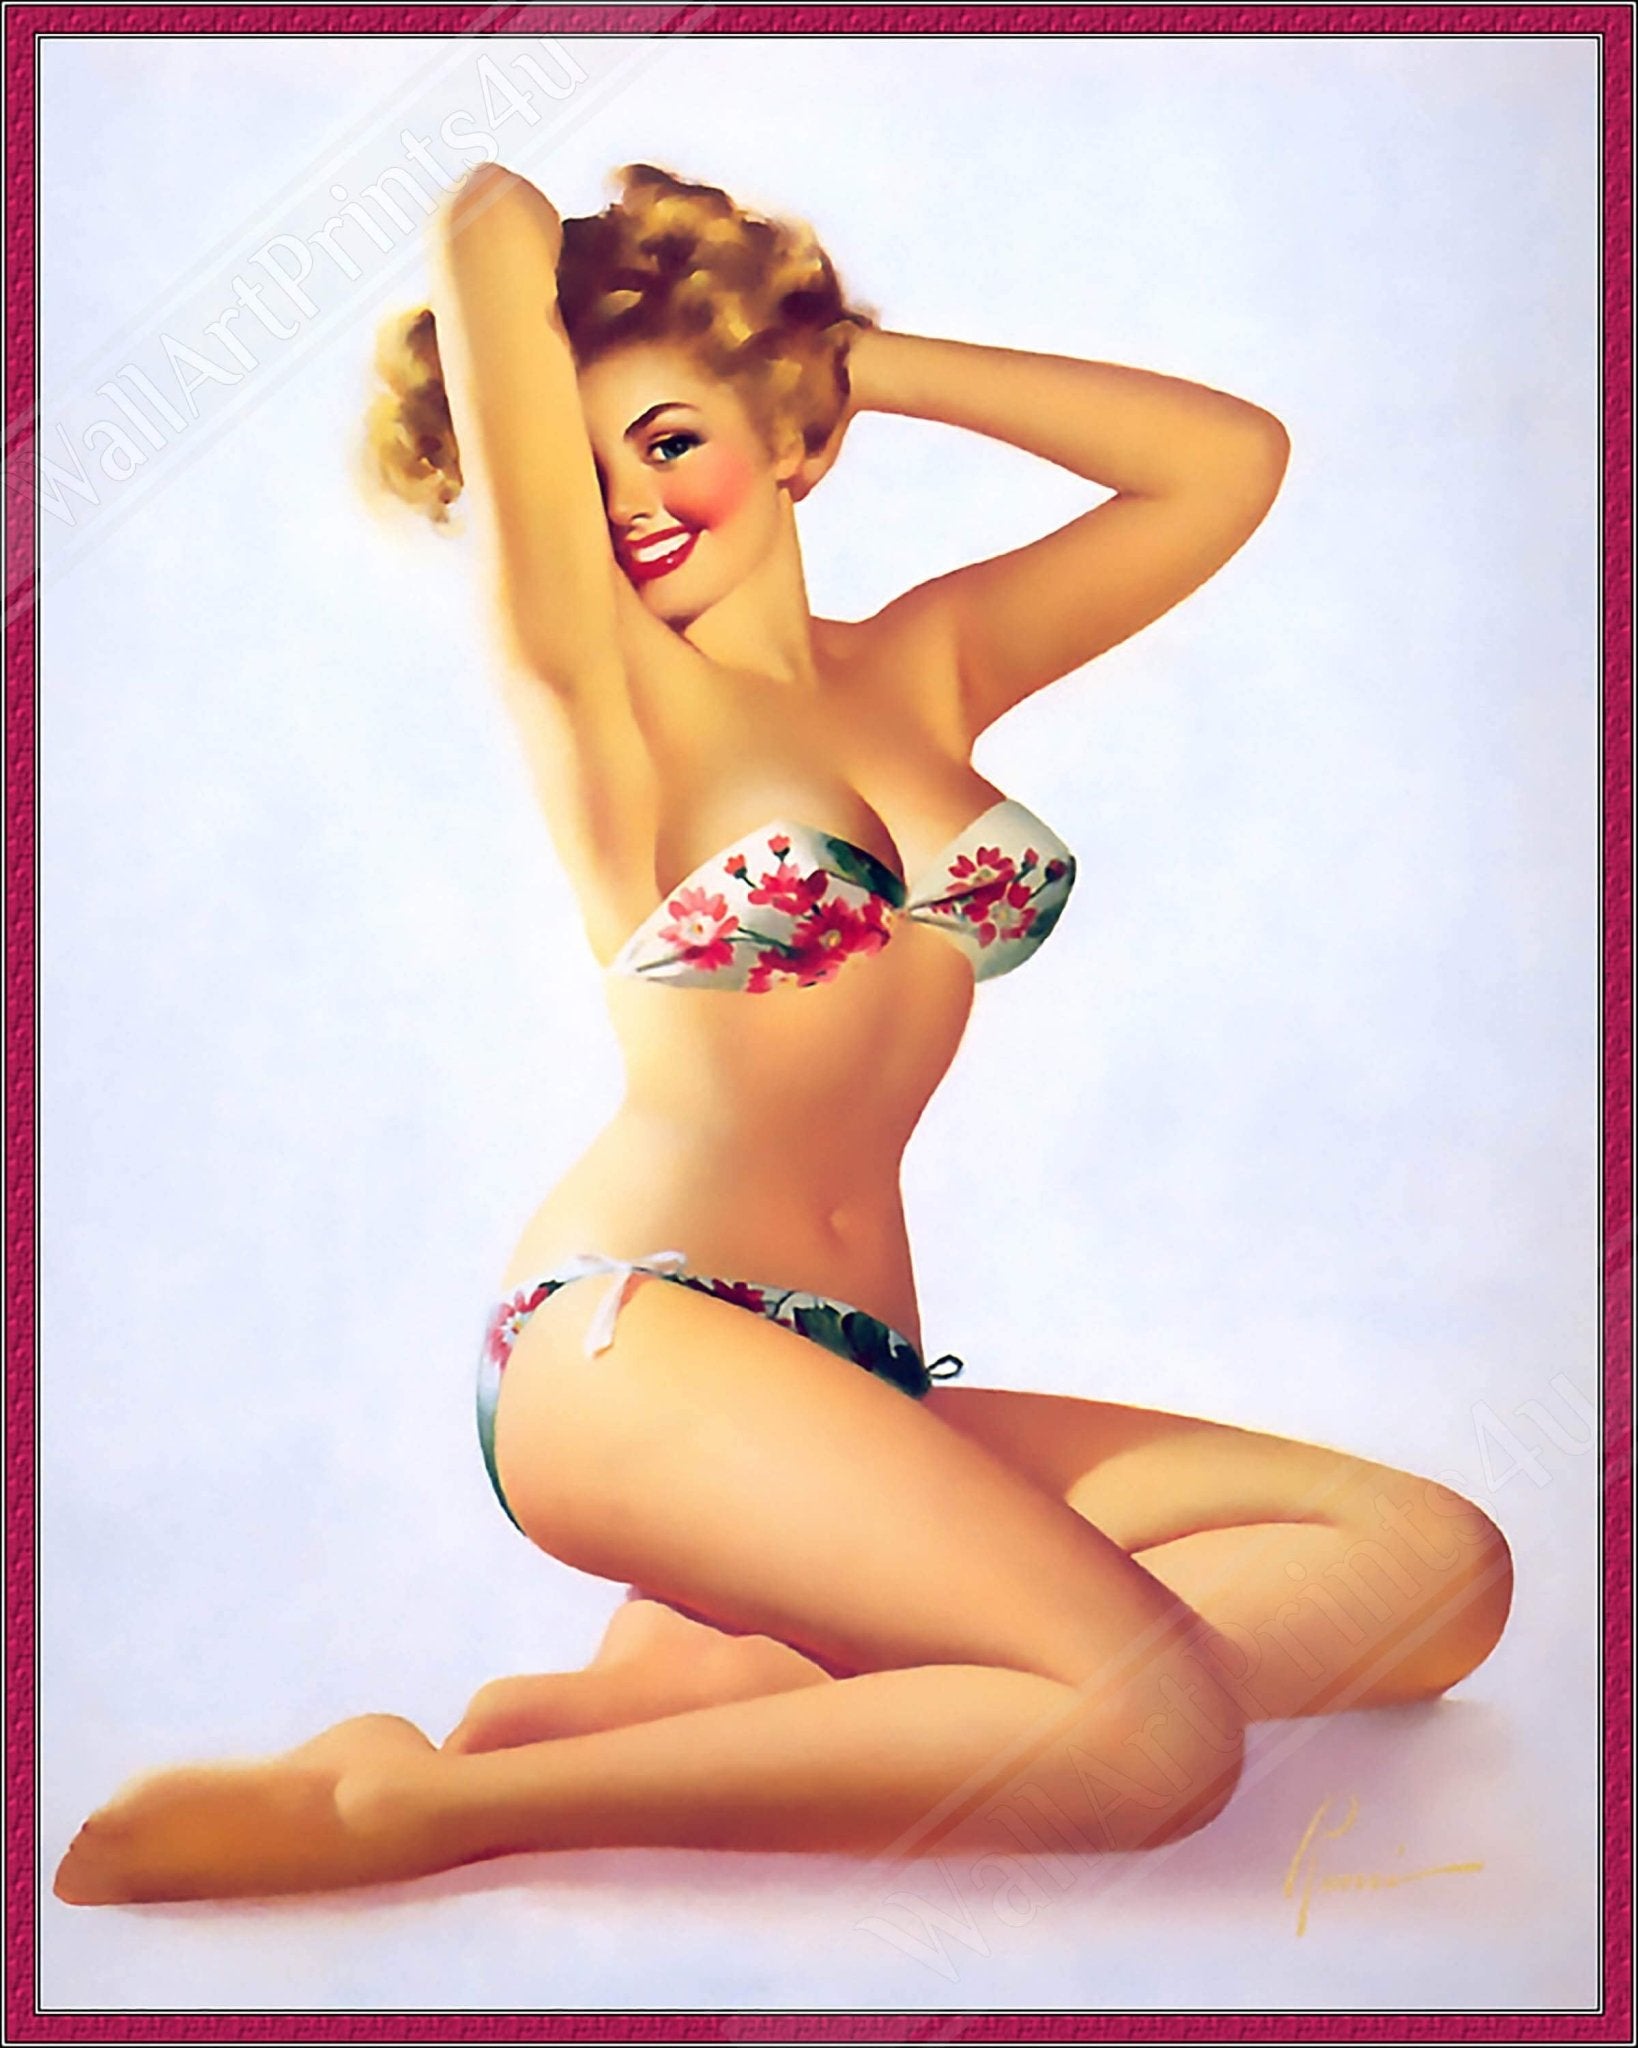 Vintage Pin Up Girl Canvas, Red Flowers On Bikini - Edward Runci - Vintage Art - Retro Pin Up Girl Canvas Print - Late 1940'S - 1950'S - WallArtPrints4U